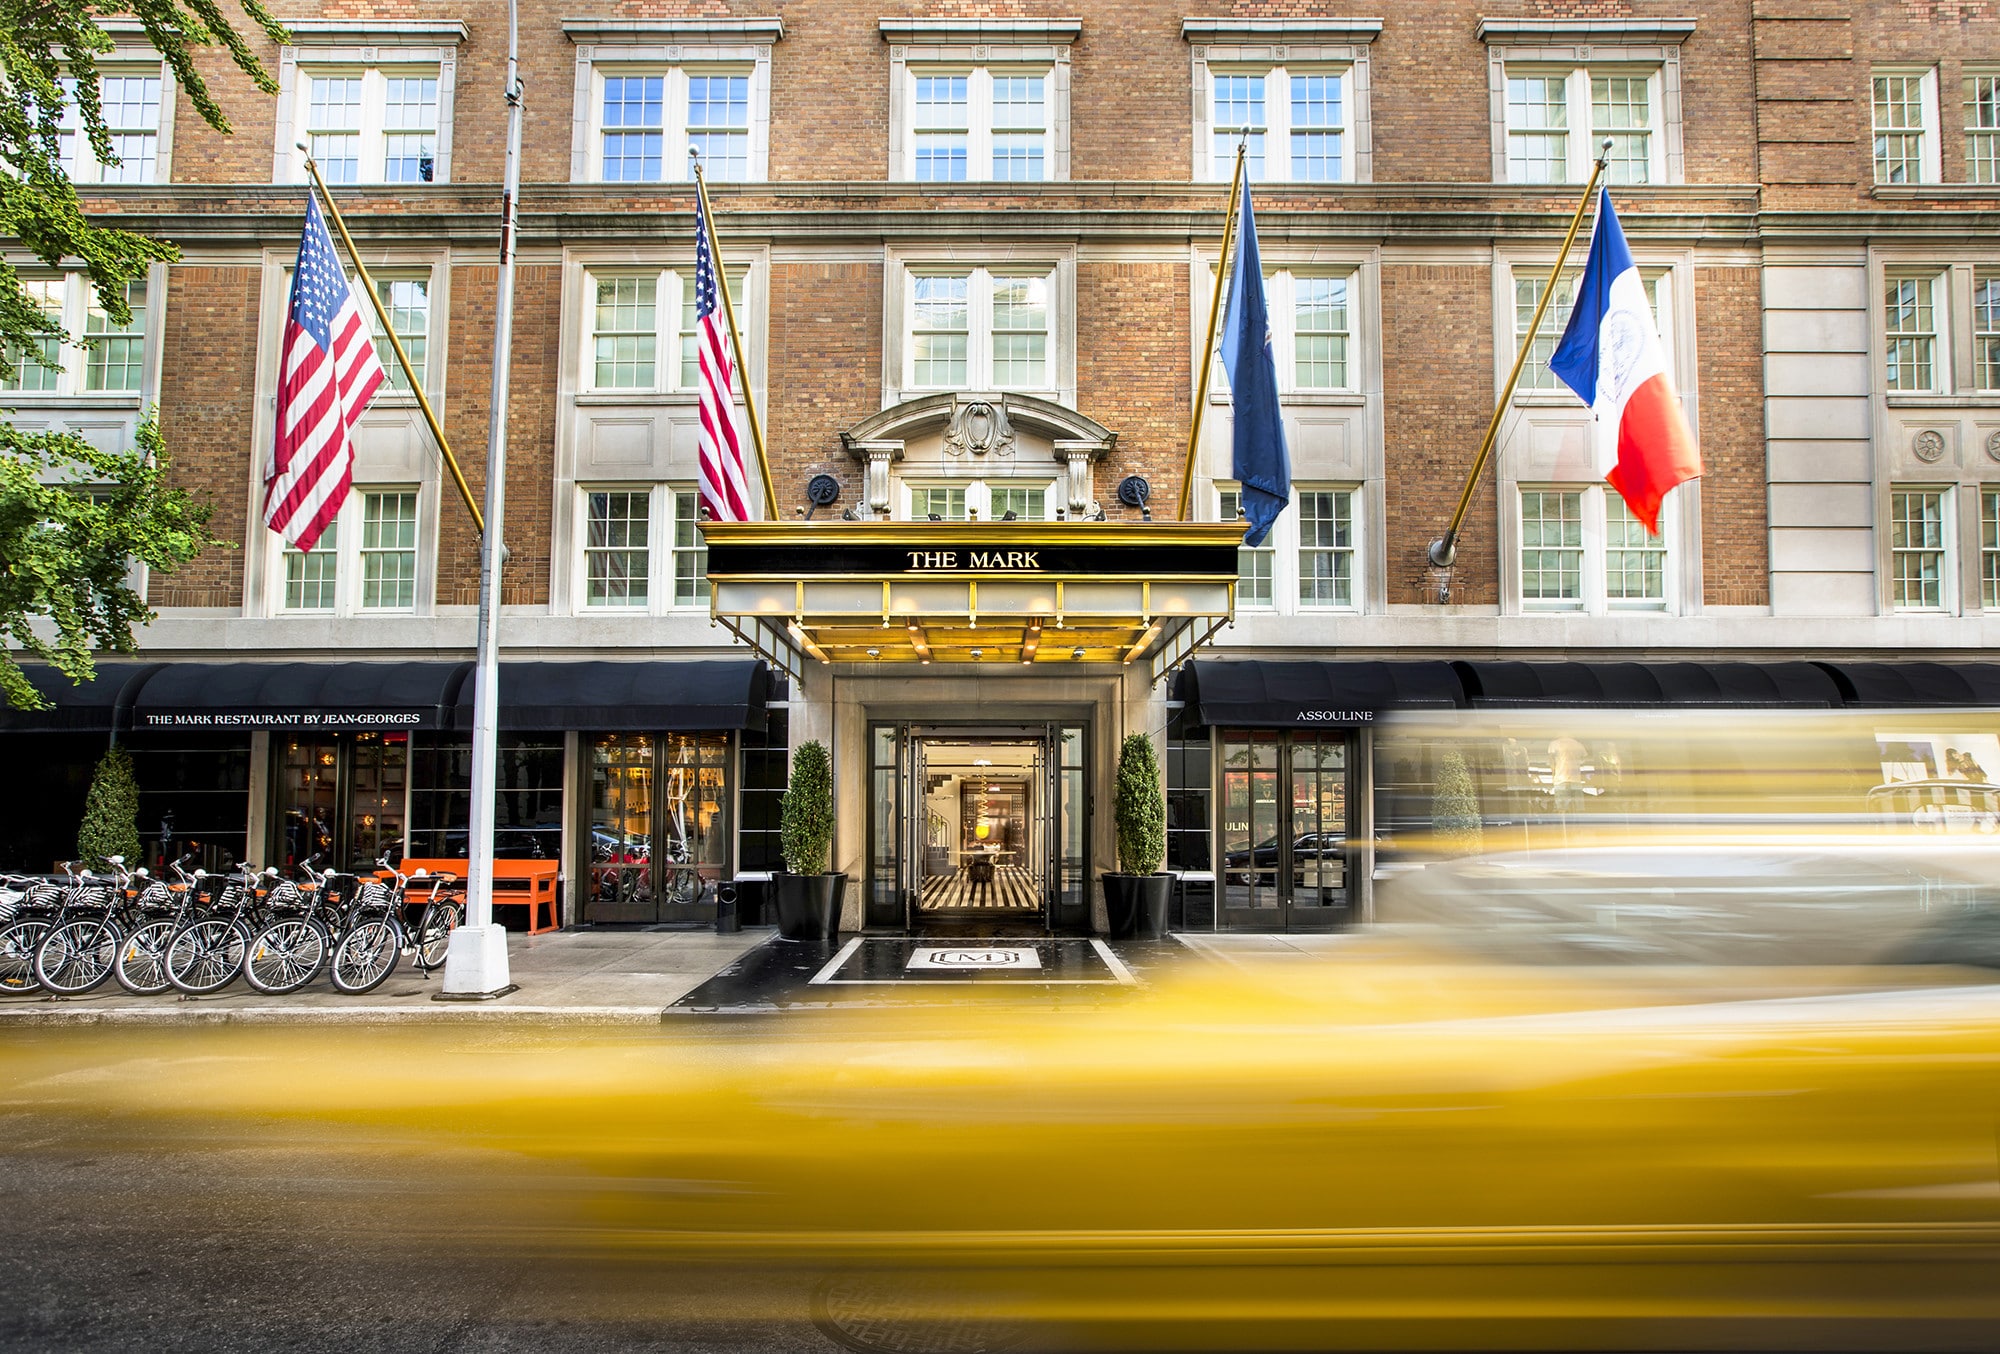 A daytime view of the atrium entrance to The Mark Hotel, NYC